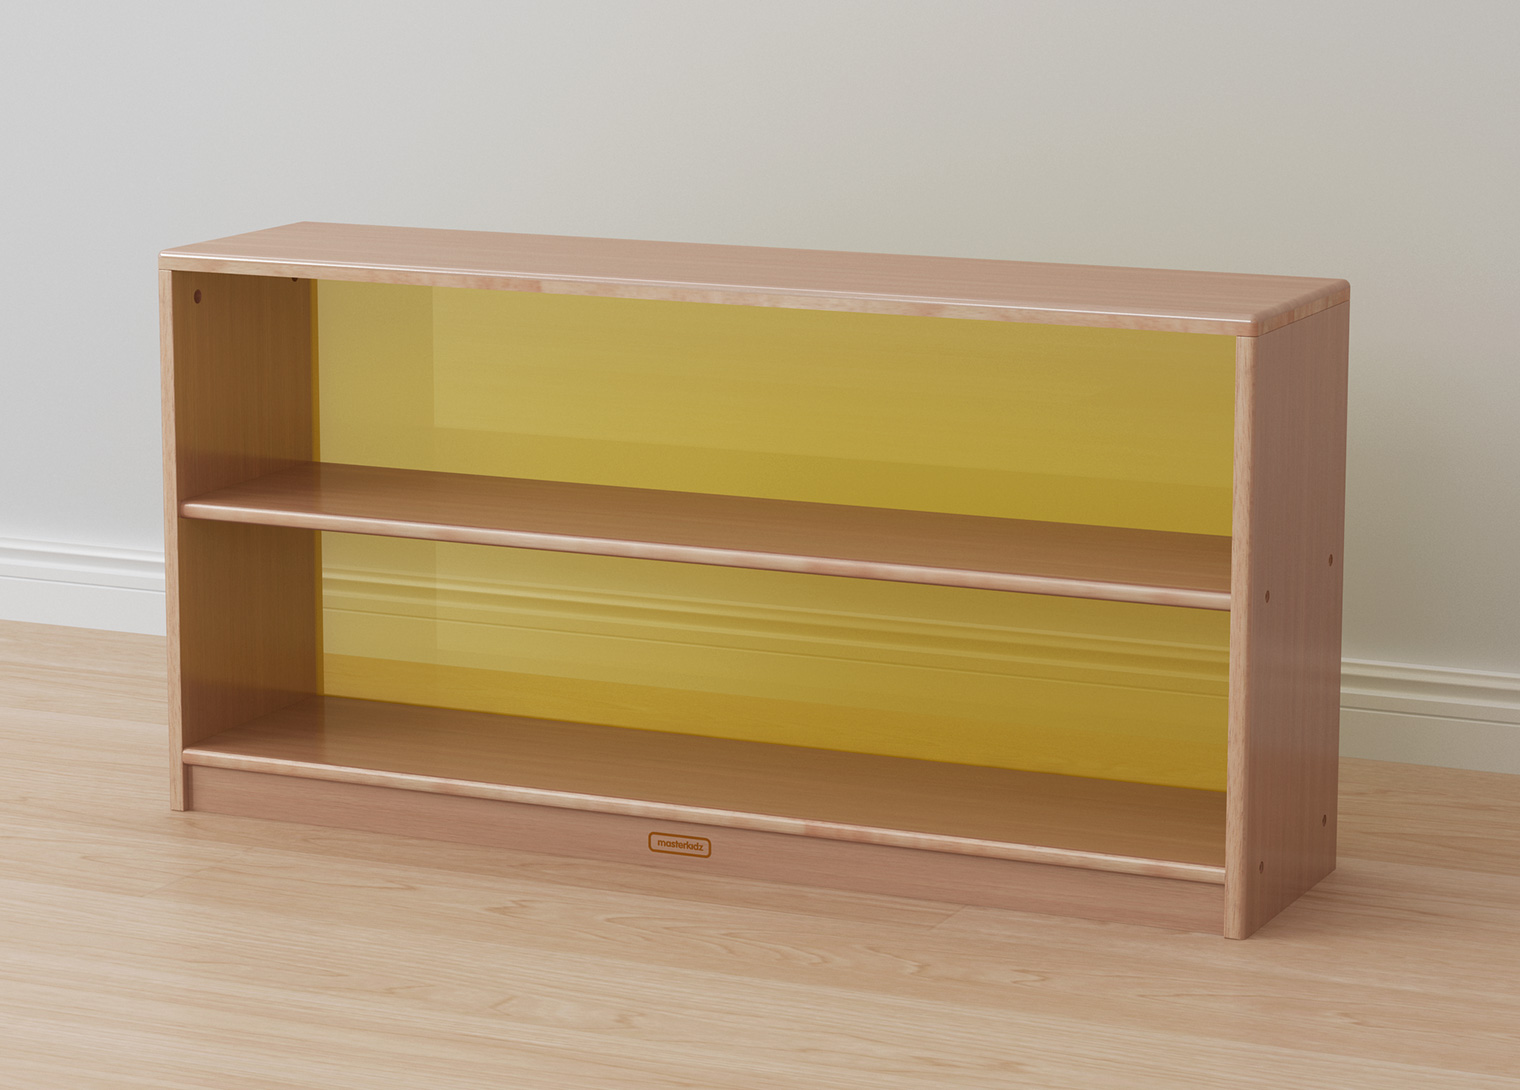 Forest School - 609H x 1210L Wooden  Shelving Unit - Translucent Yellow Back